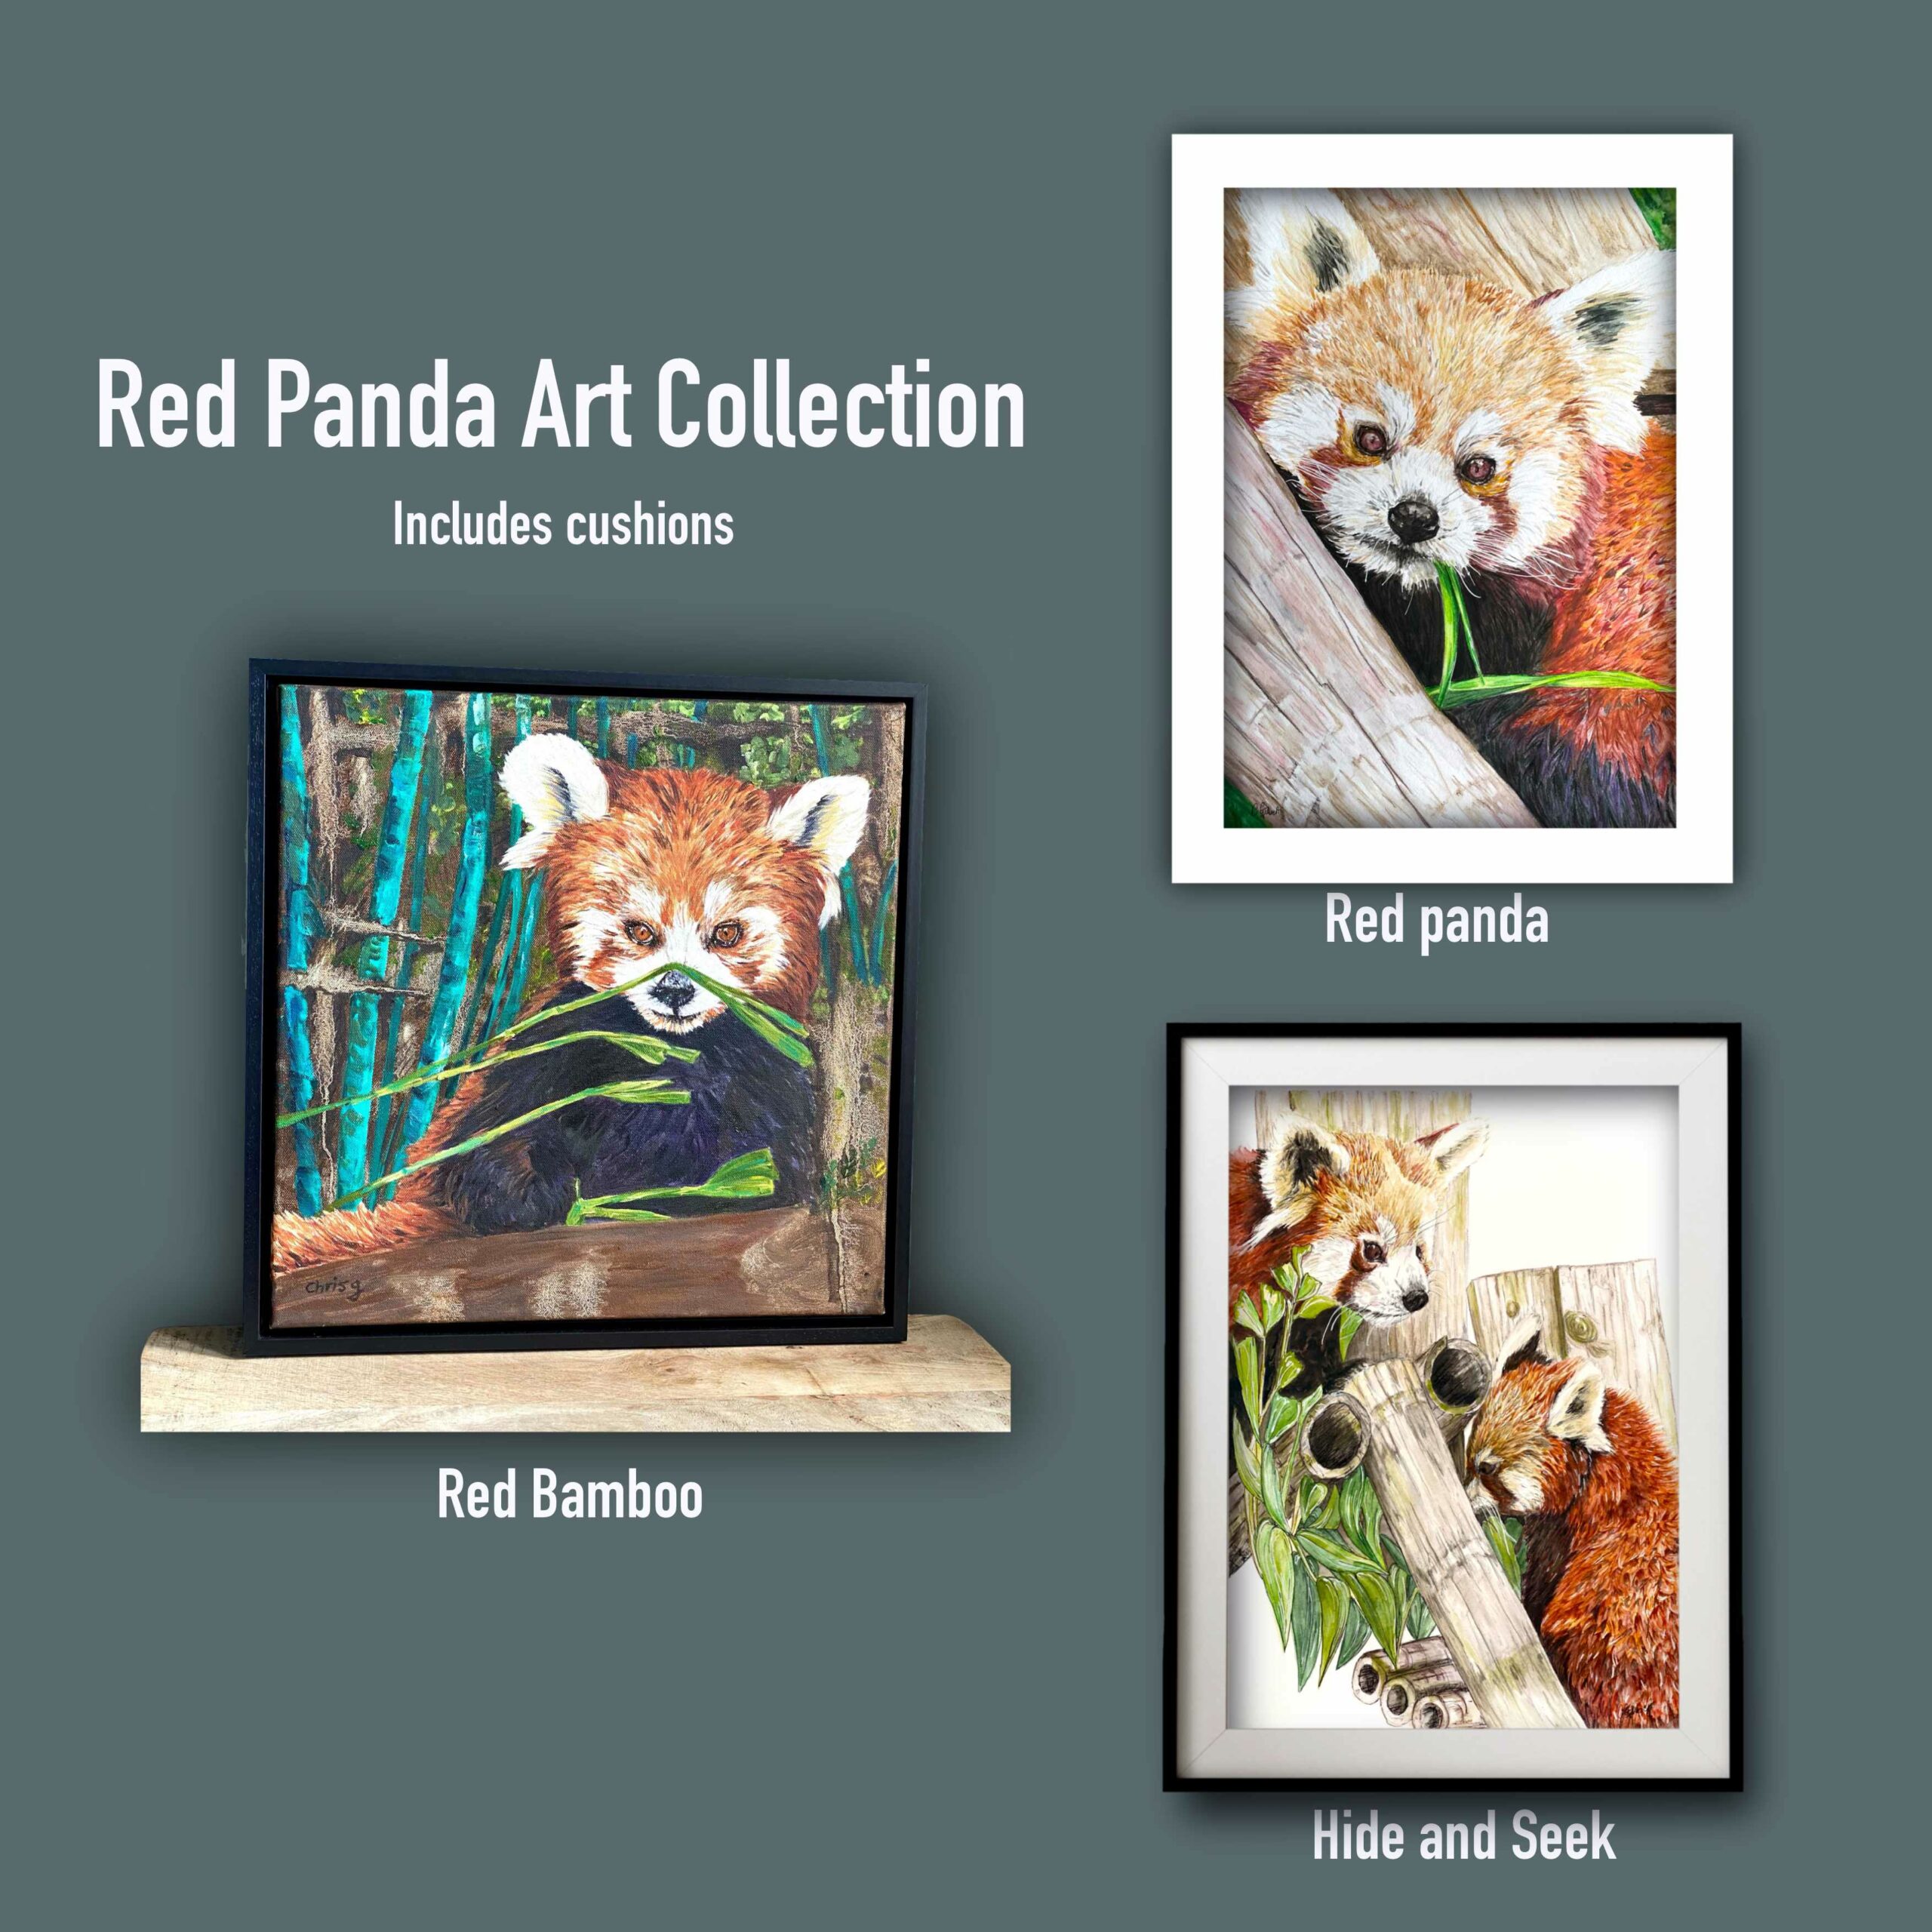 Decorative picture of the 3 red panda pictures